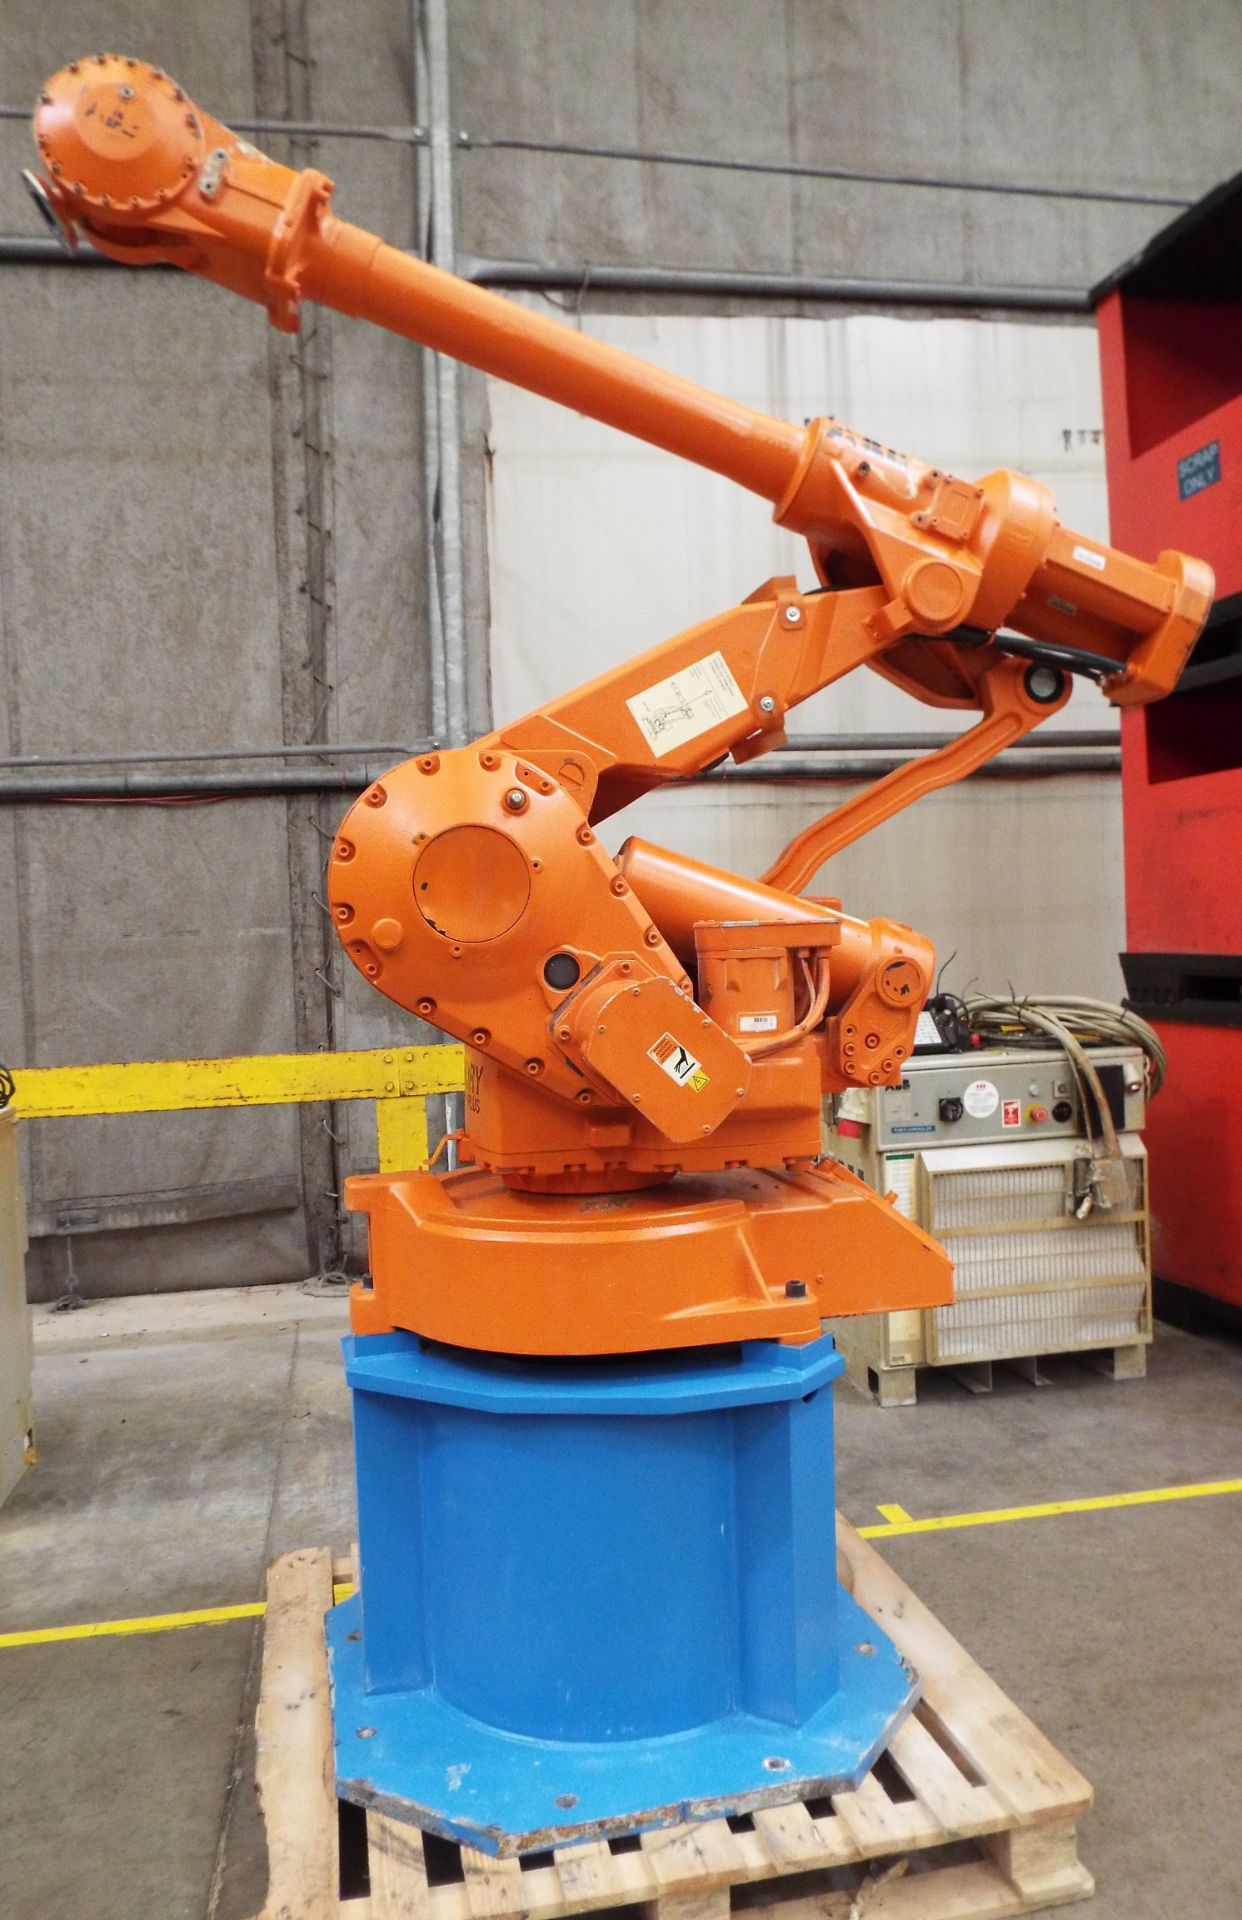 ABB-IRB 4400 - M2000 6 Axis Industrial Robot.